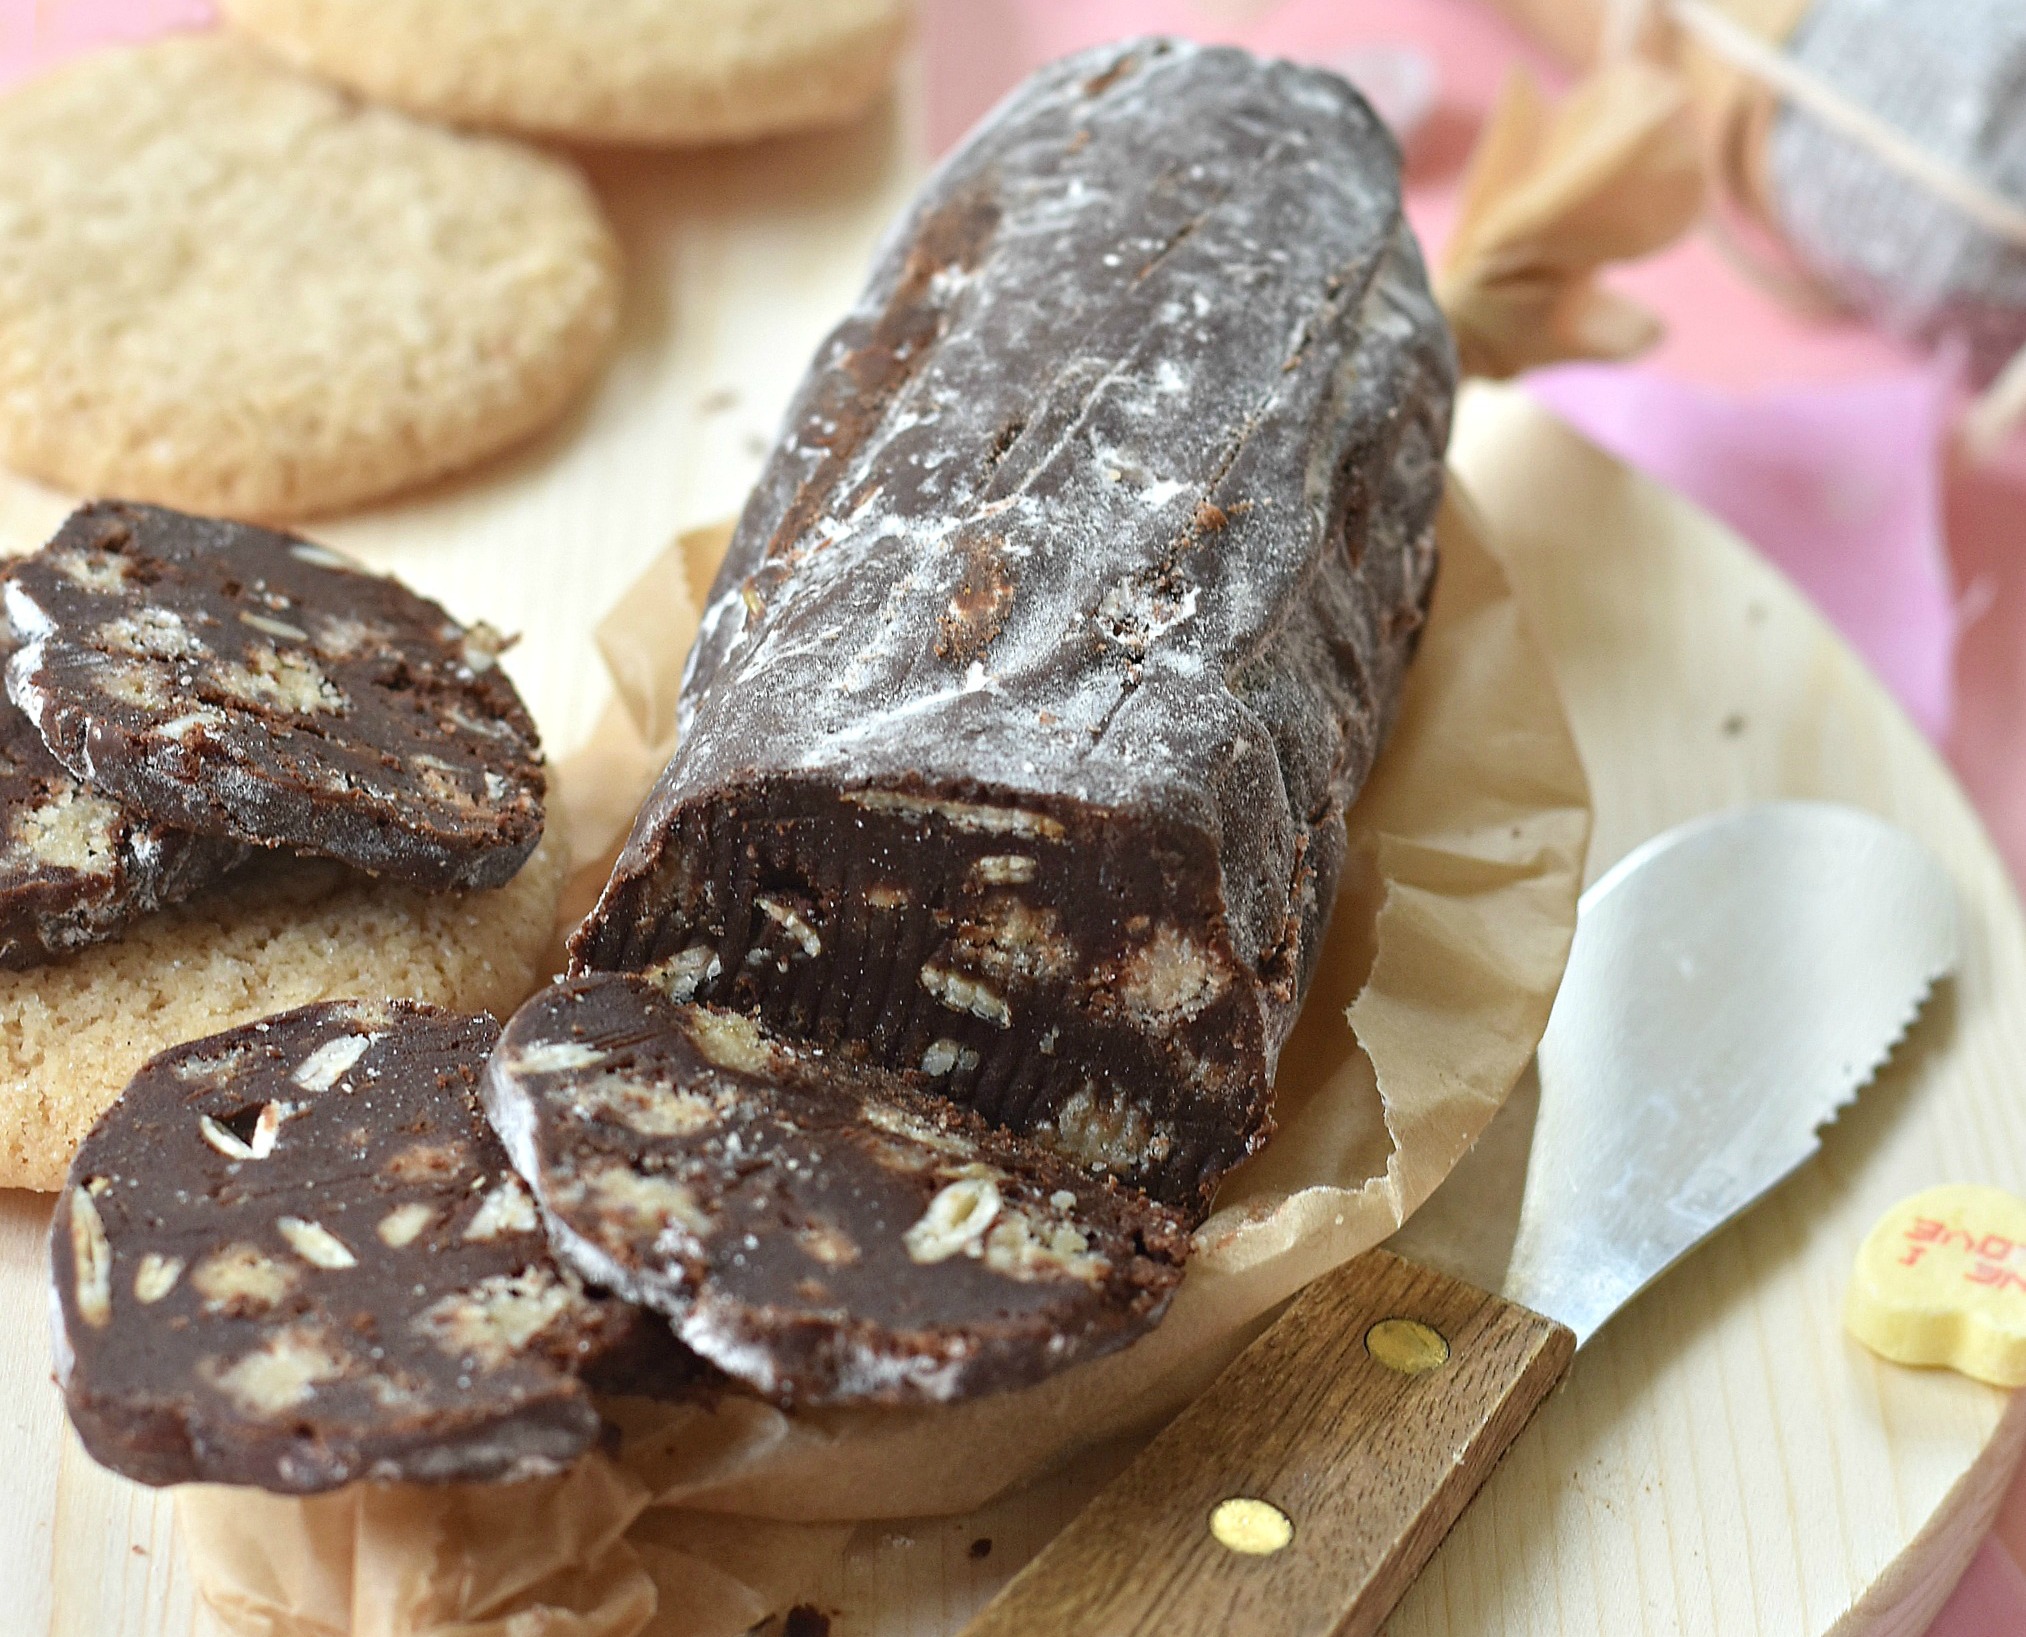 A cutting board of chocolate salami, cut into slices.